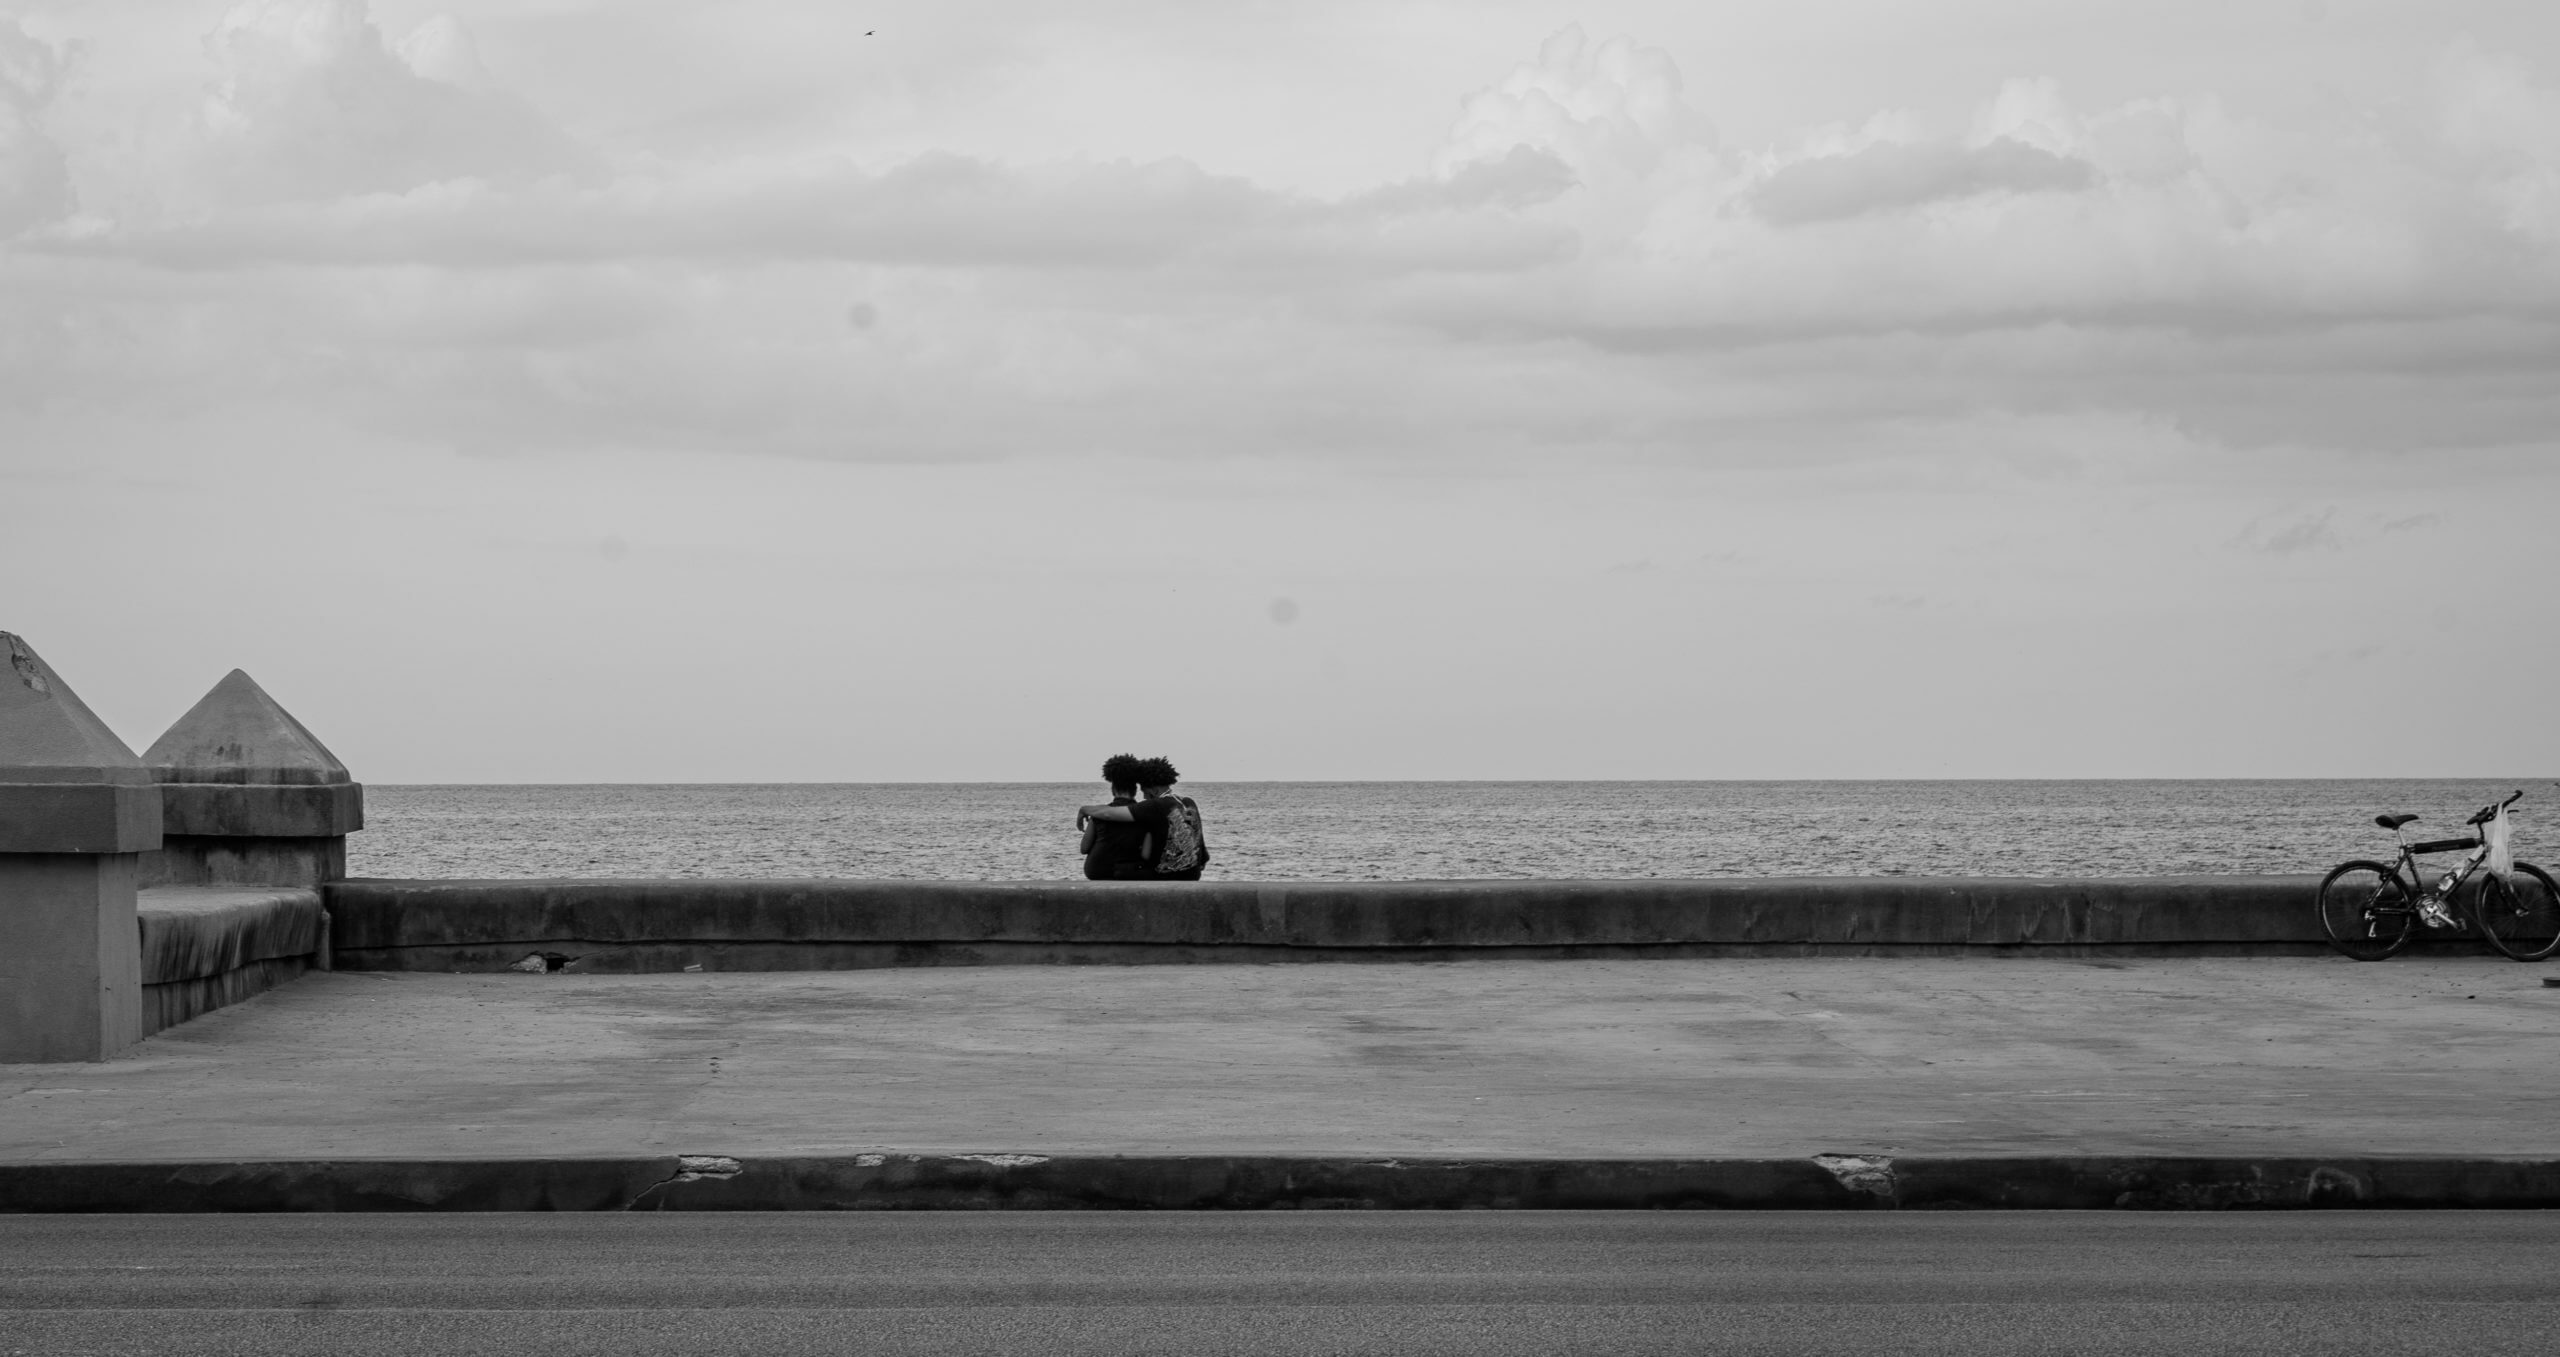 Two lovers enjoy the Malecón, a seaside protective wall that stretches for some miles along the older districts of Havana, Cuba. © 2022 John D. Elliott • www.TheHumanPulse.com